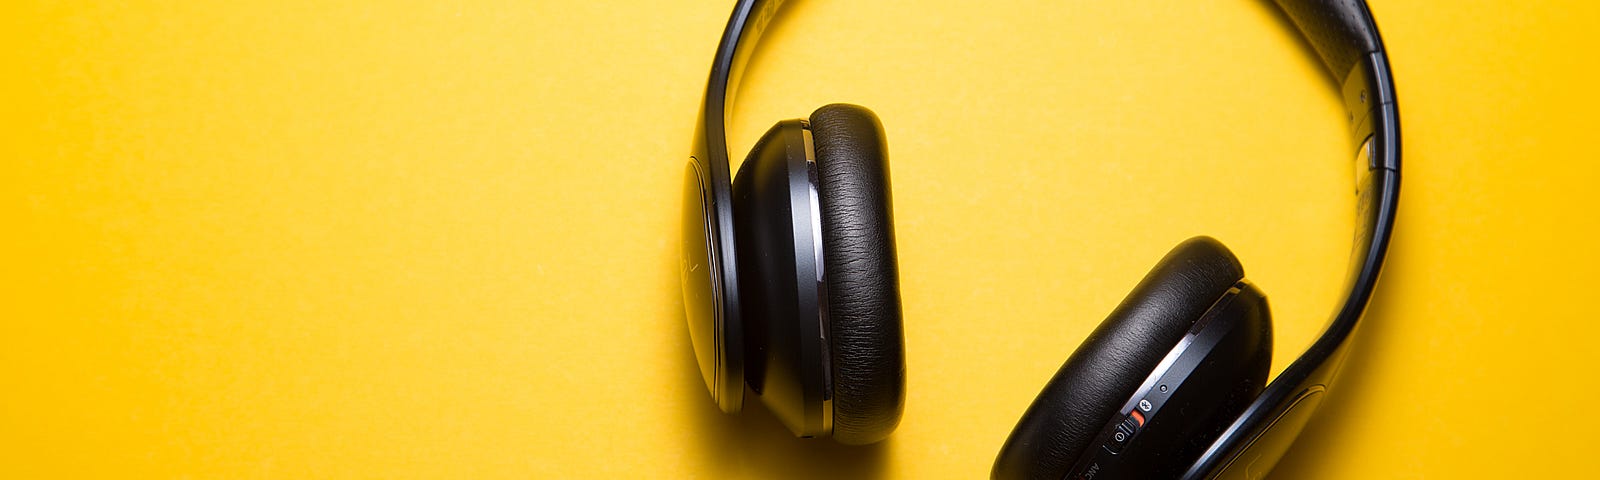 A pair of over the ear headphones on a yellow background